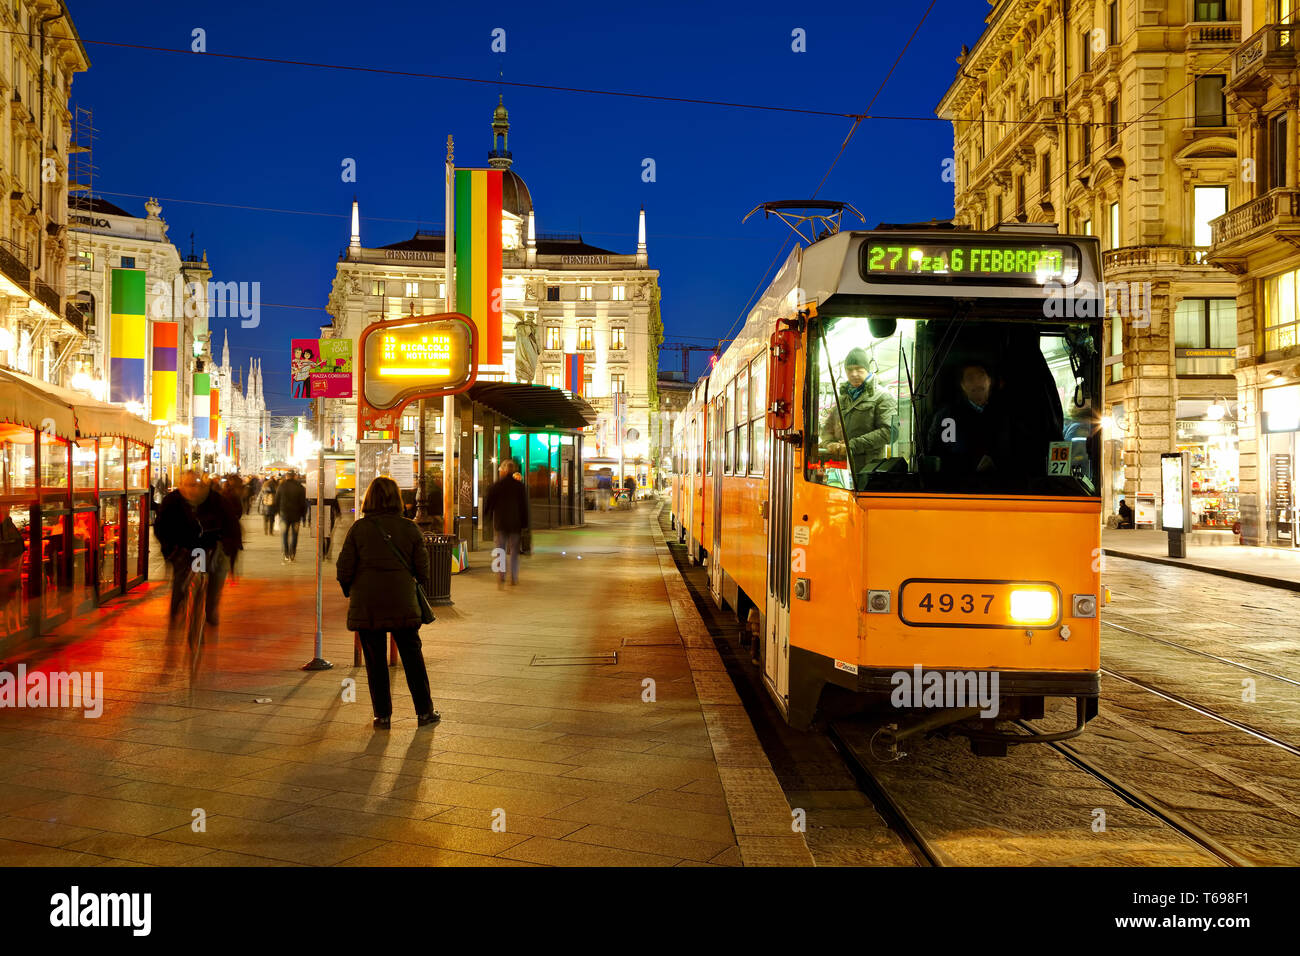 Via Dante shopping street with people at night Stock Photo